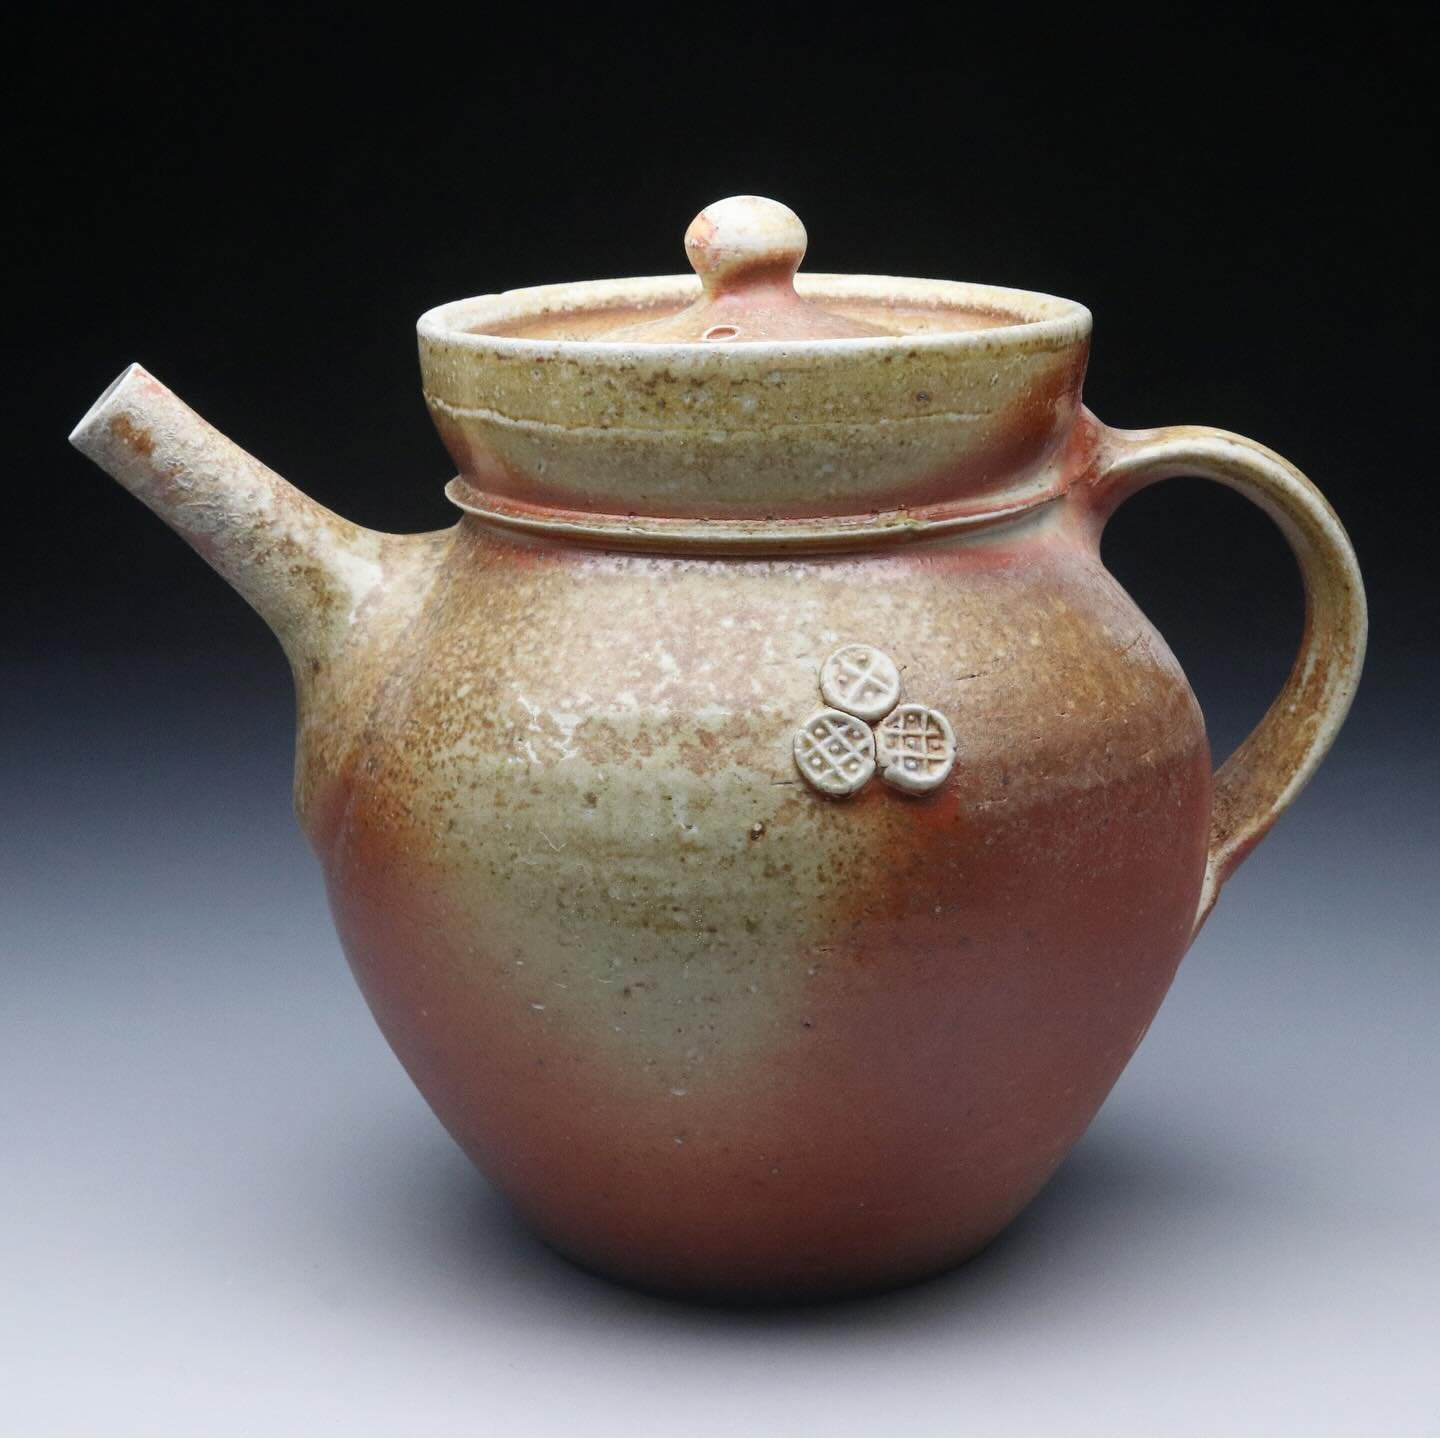 Teapottery! My favorite kind of pottery. There are several different shapes and sizes of teapots available in my online shop currently. I bet your mum would love a teapot. Just saying. I&rsquo;ll get all the orders that come in today packed up and sh